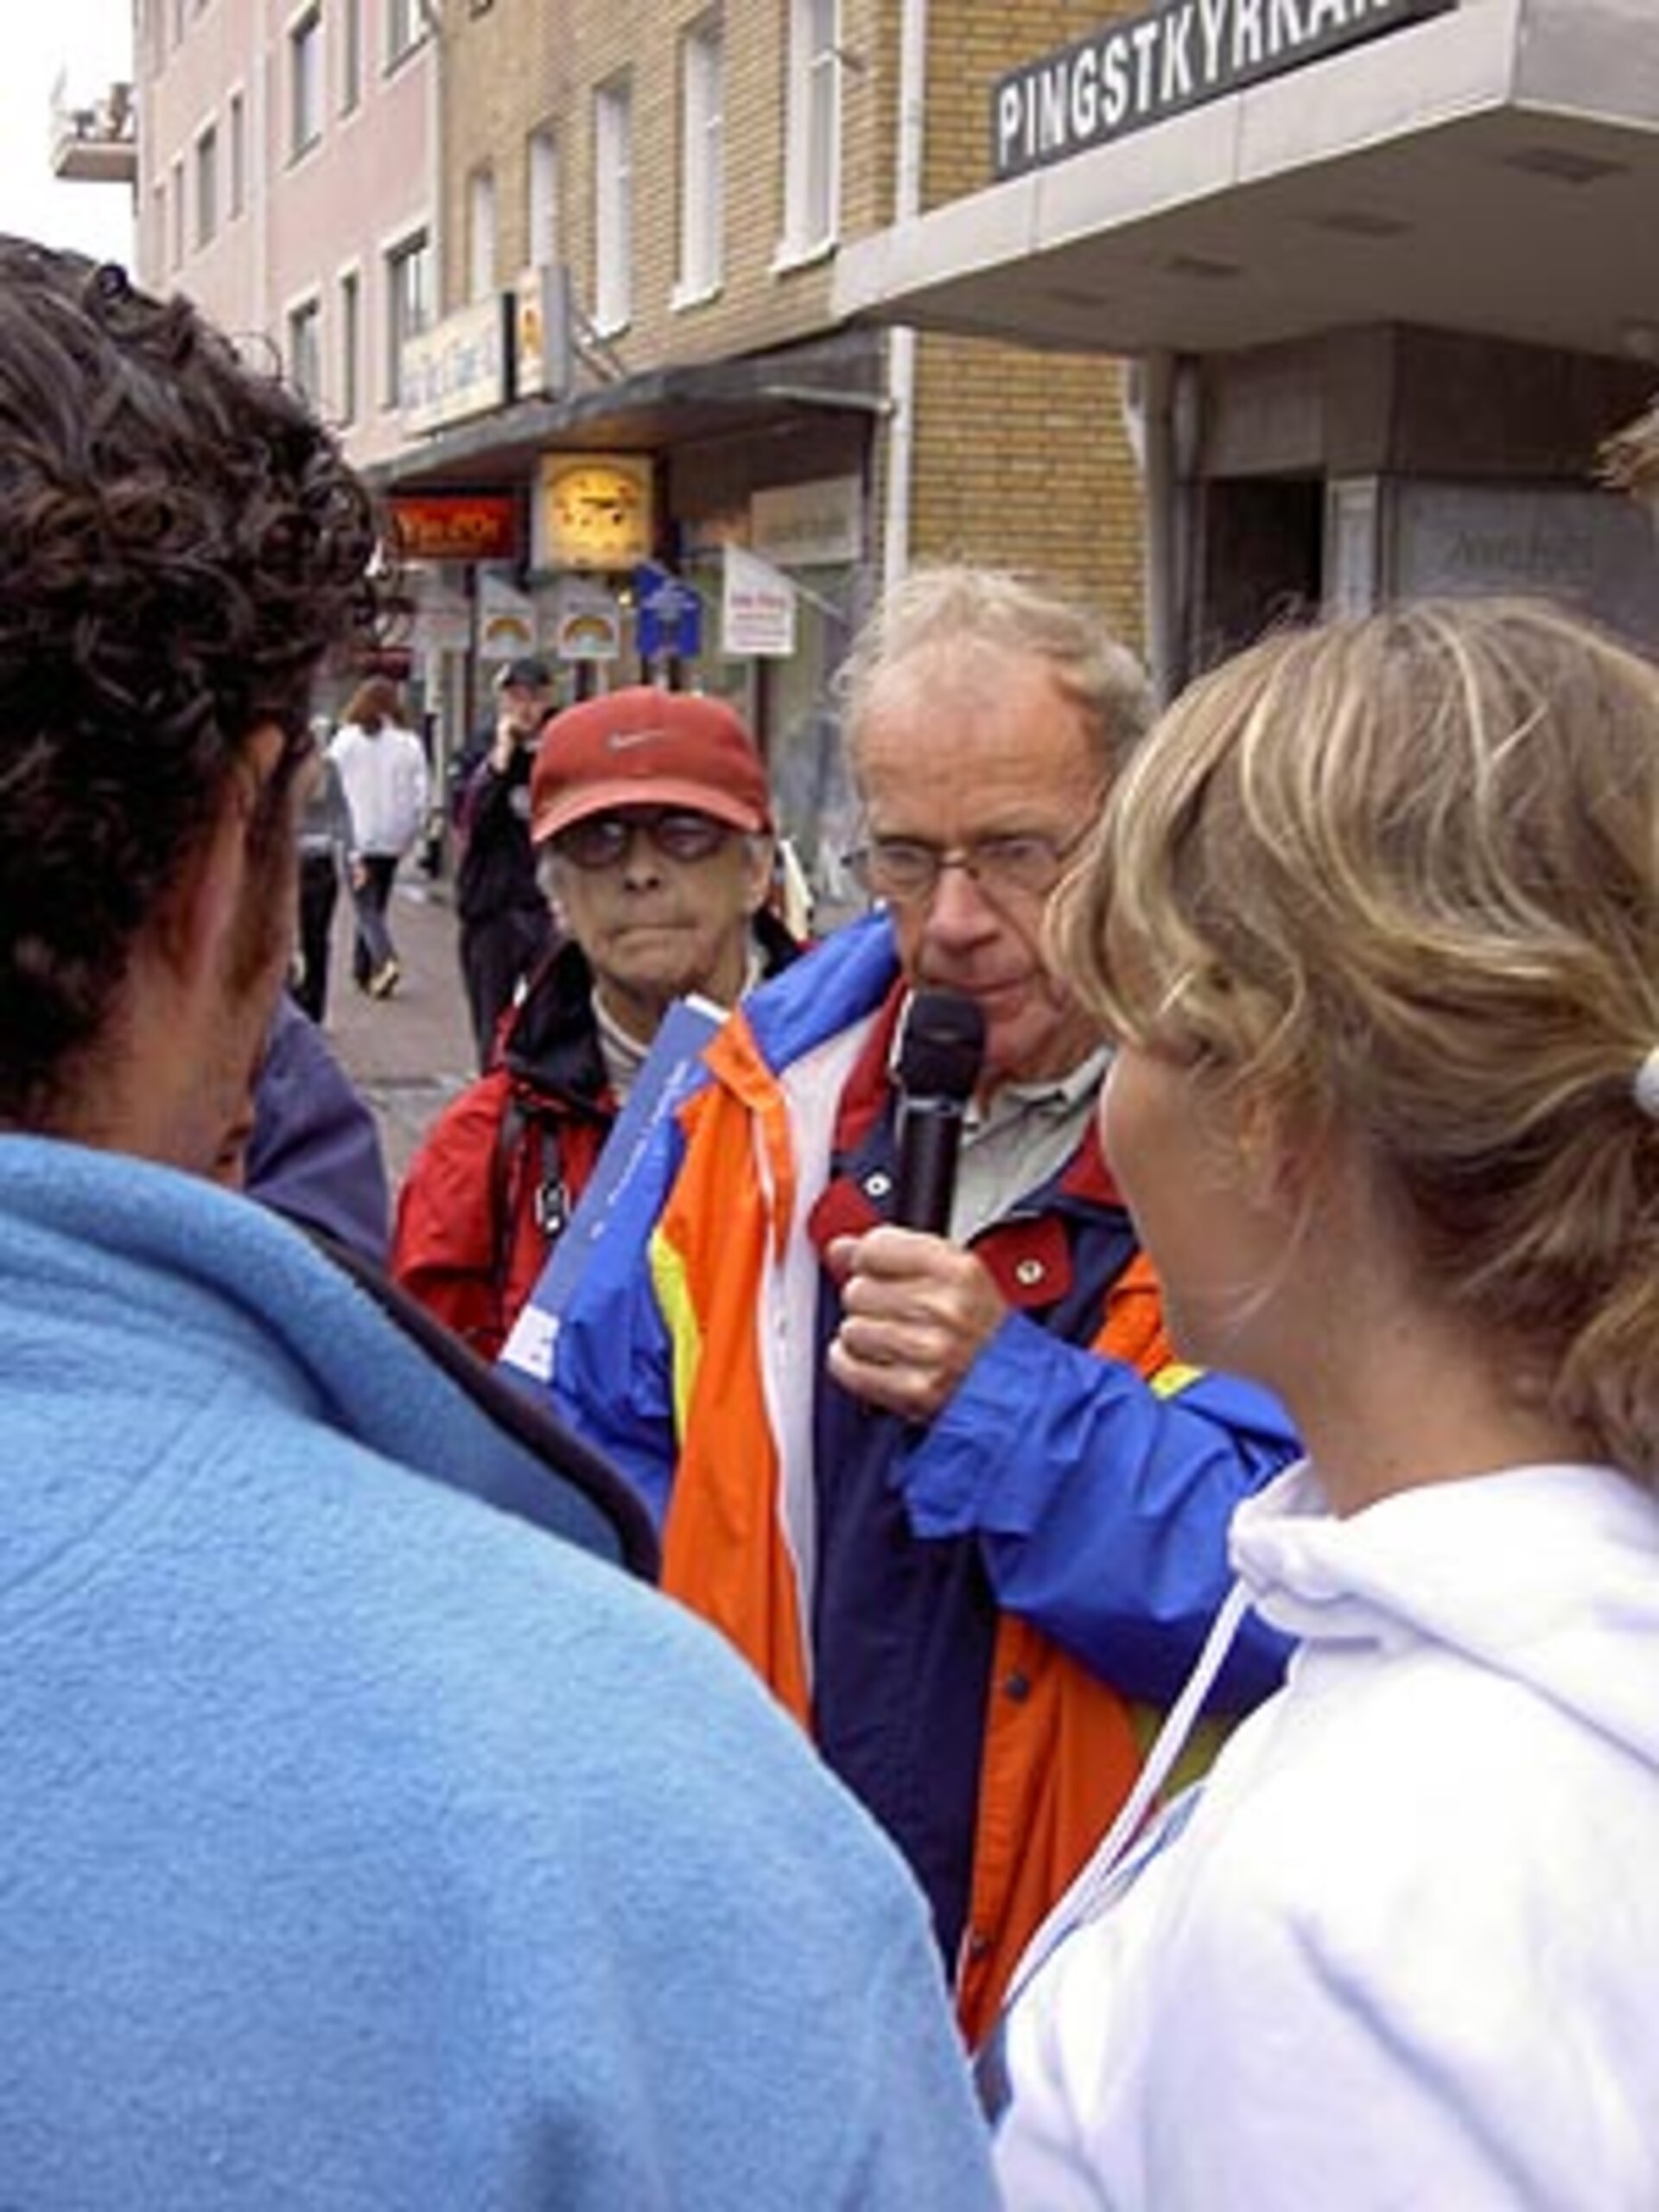 Team members interviewed by locals at Storgatan